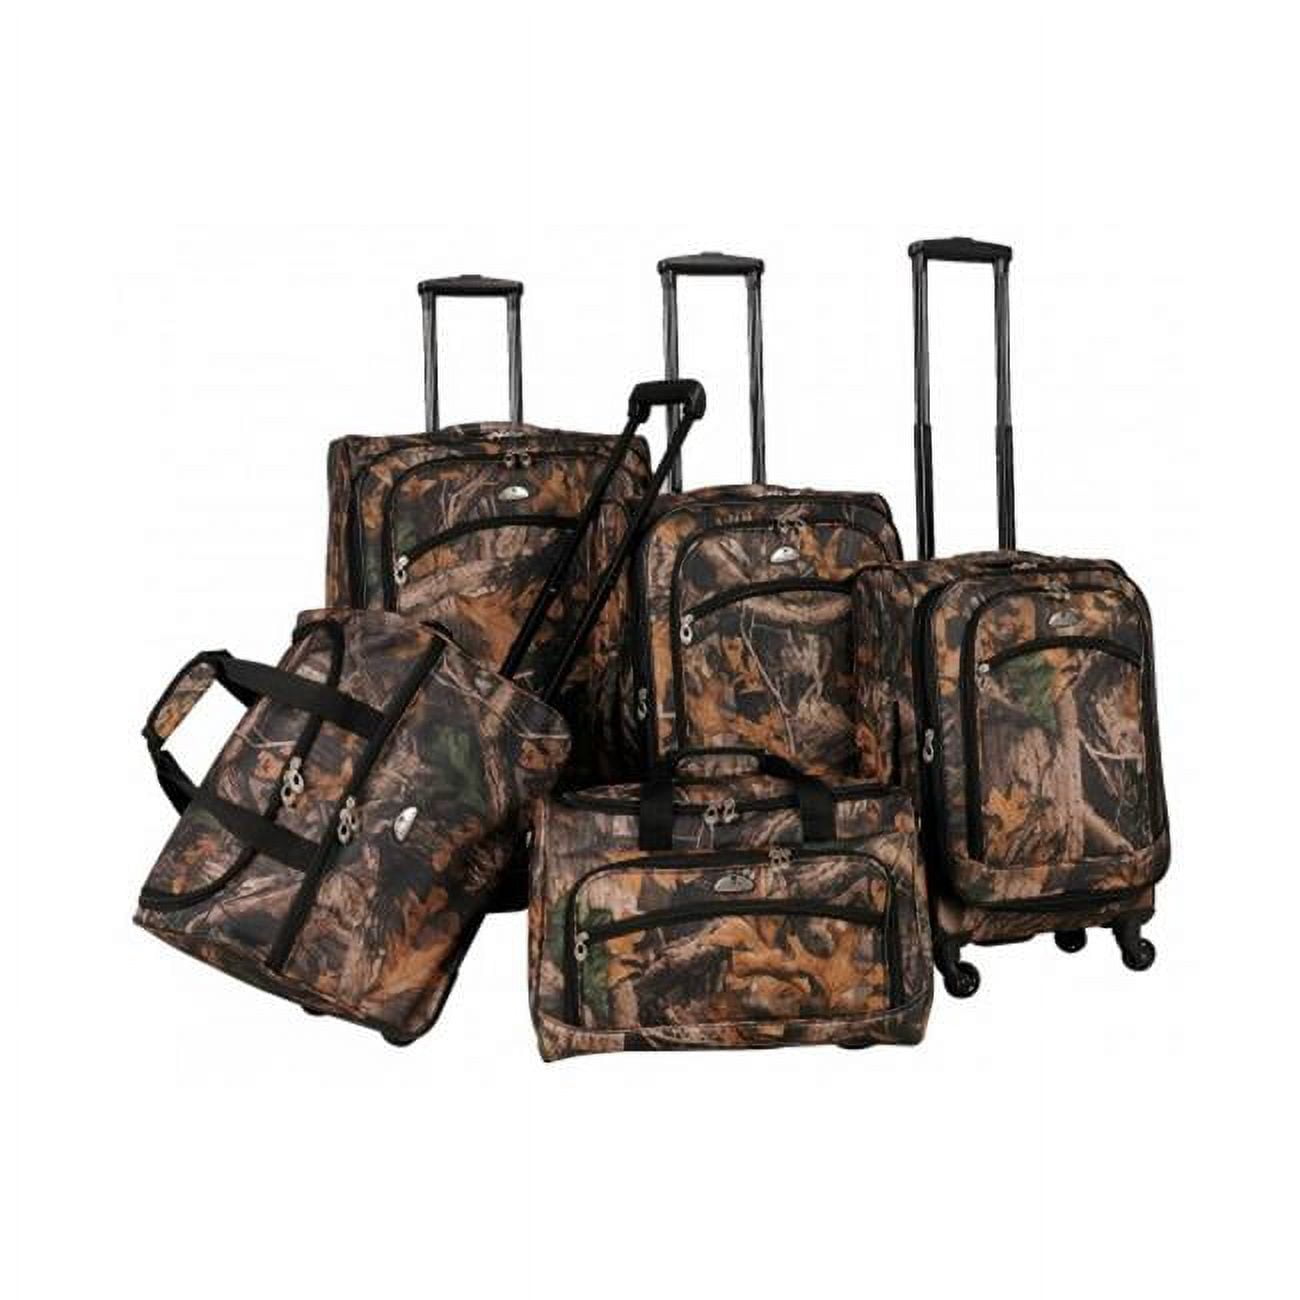 Picture of American Flyer 95400-5 CGRN AF Camo Luggage Set - 5 Piece